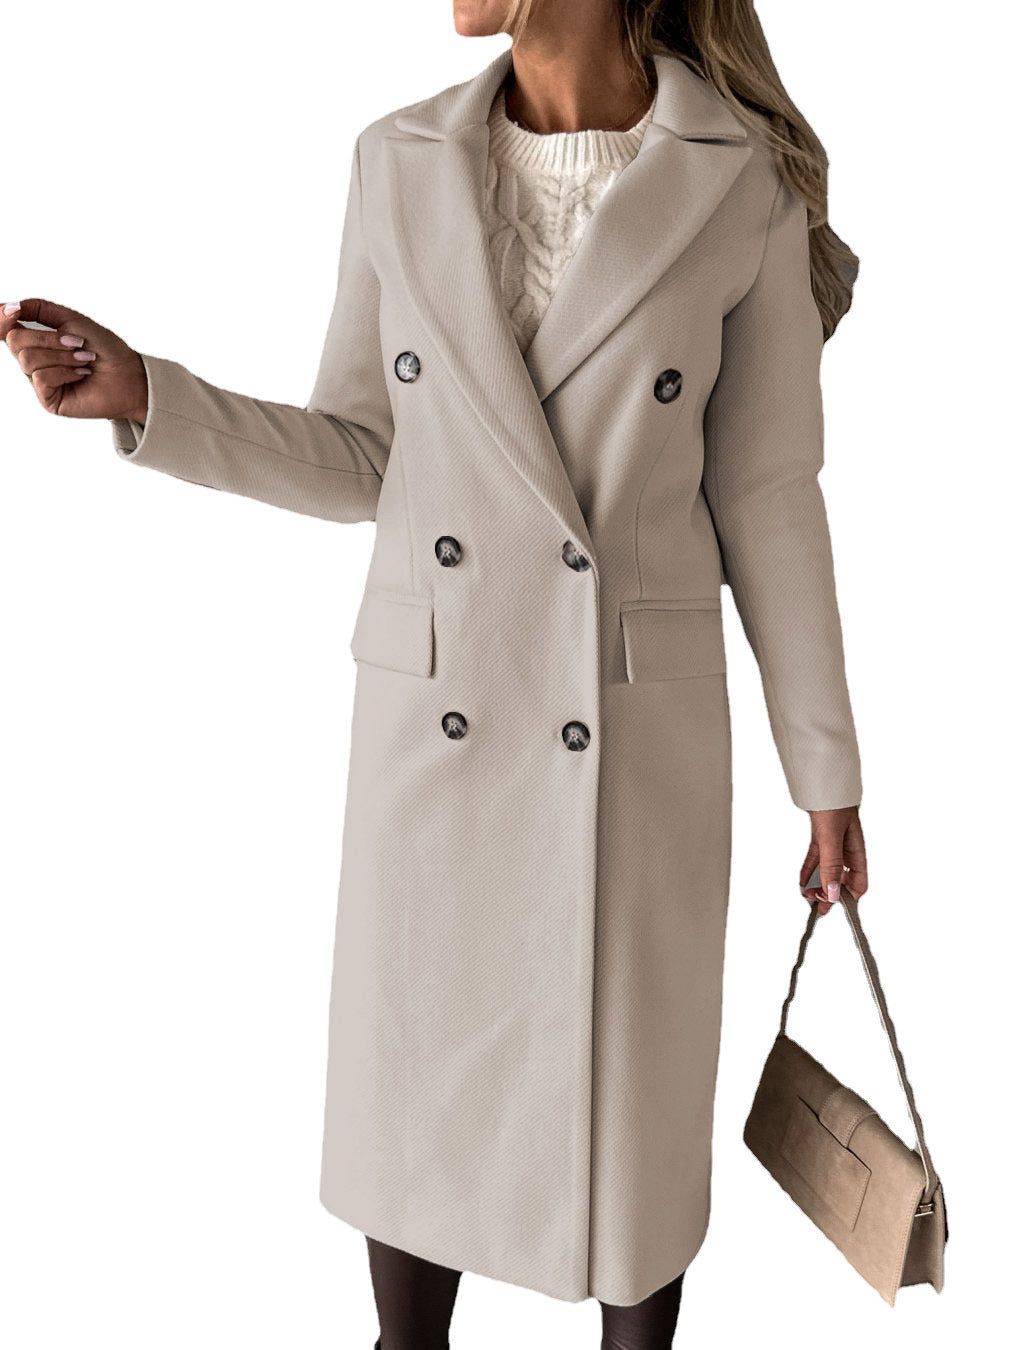 Long Sleeve Lapel Solid Double Breasted Slim Coat Coat